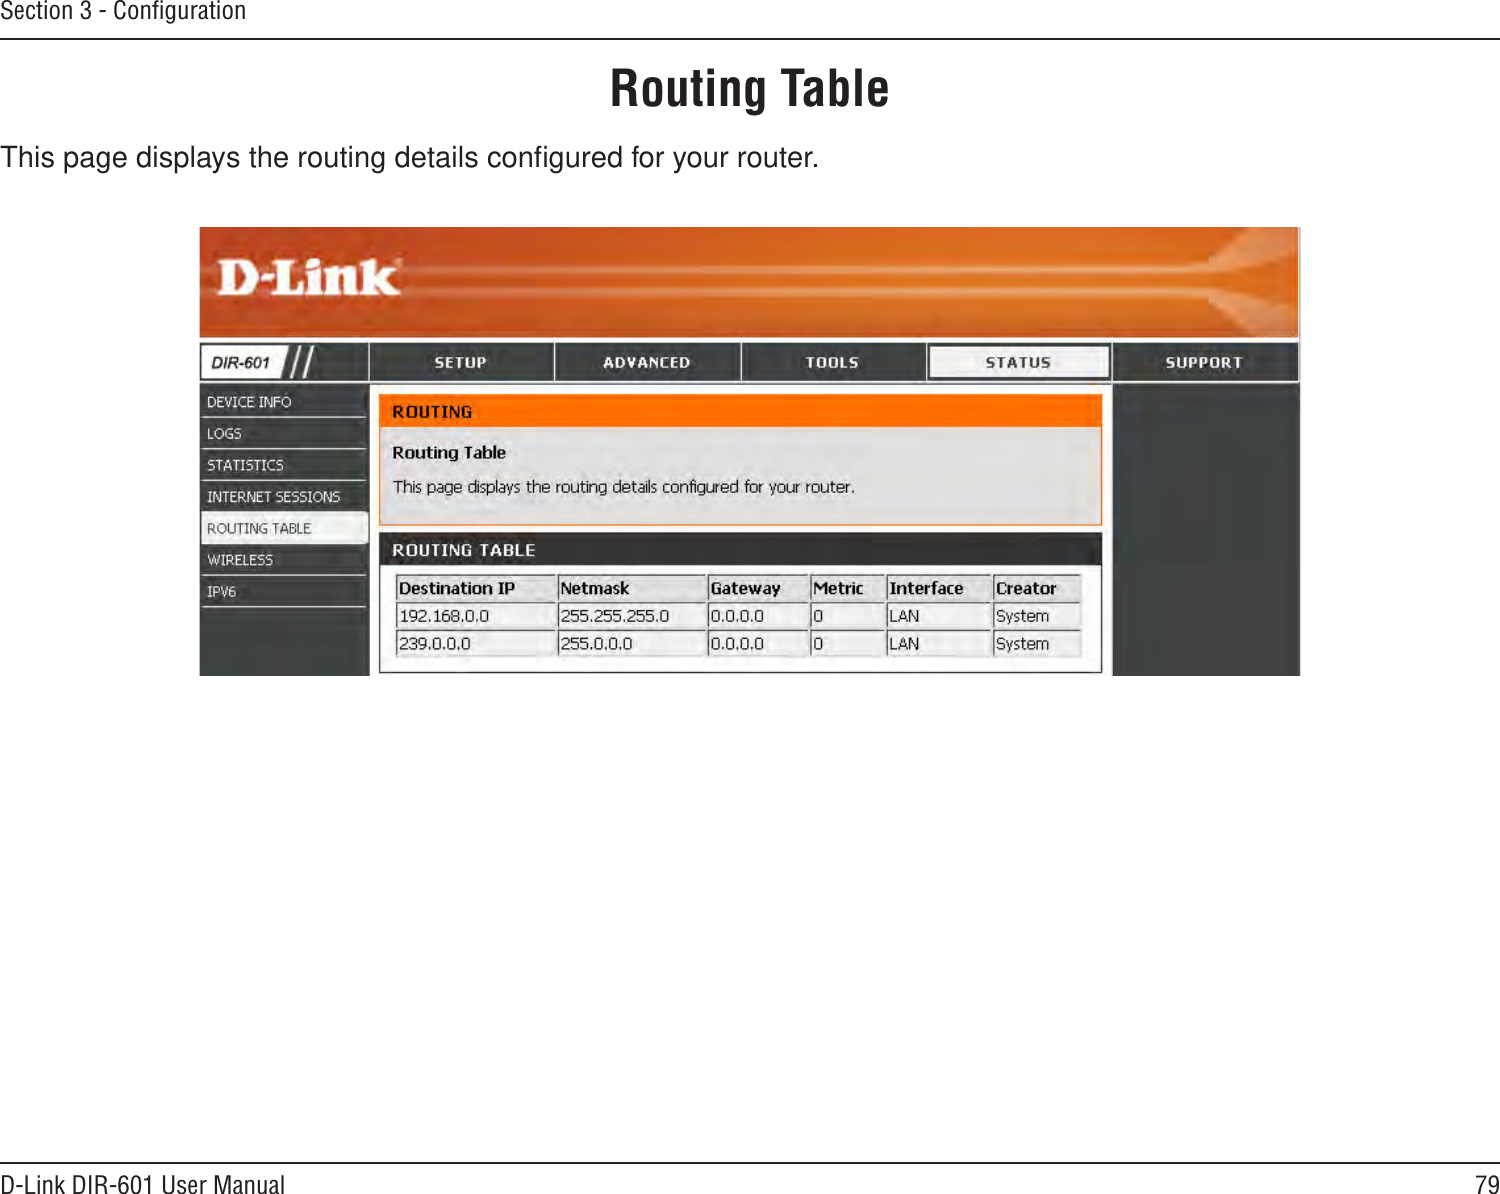 79D-Link DIR-601 User ManualSection 3 - ConﬁgurationThis page displays the routing details conﬁgured for your router.Routing Table